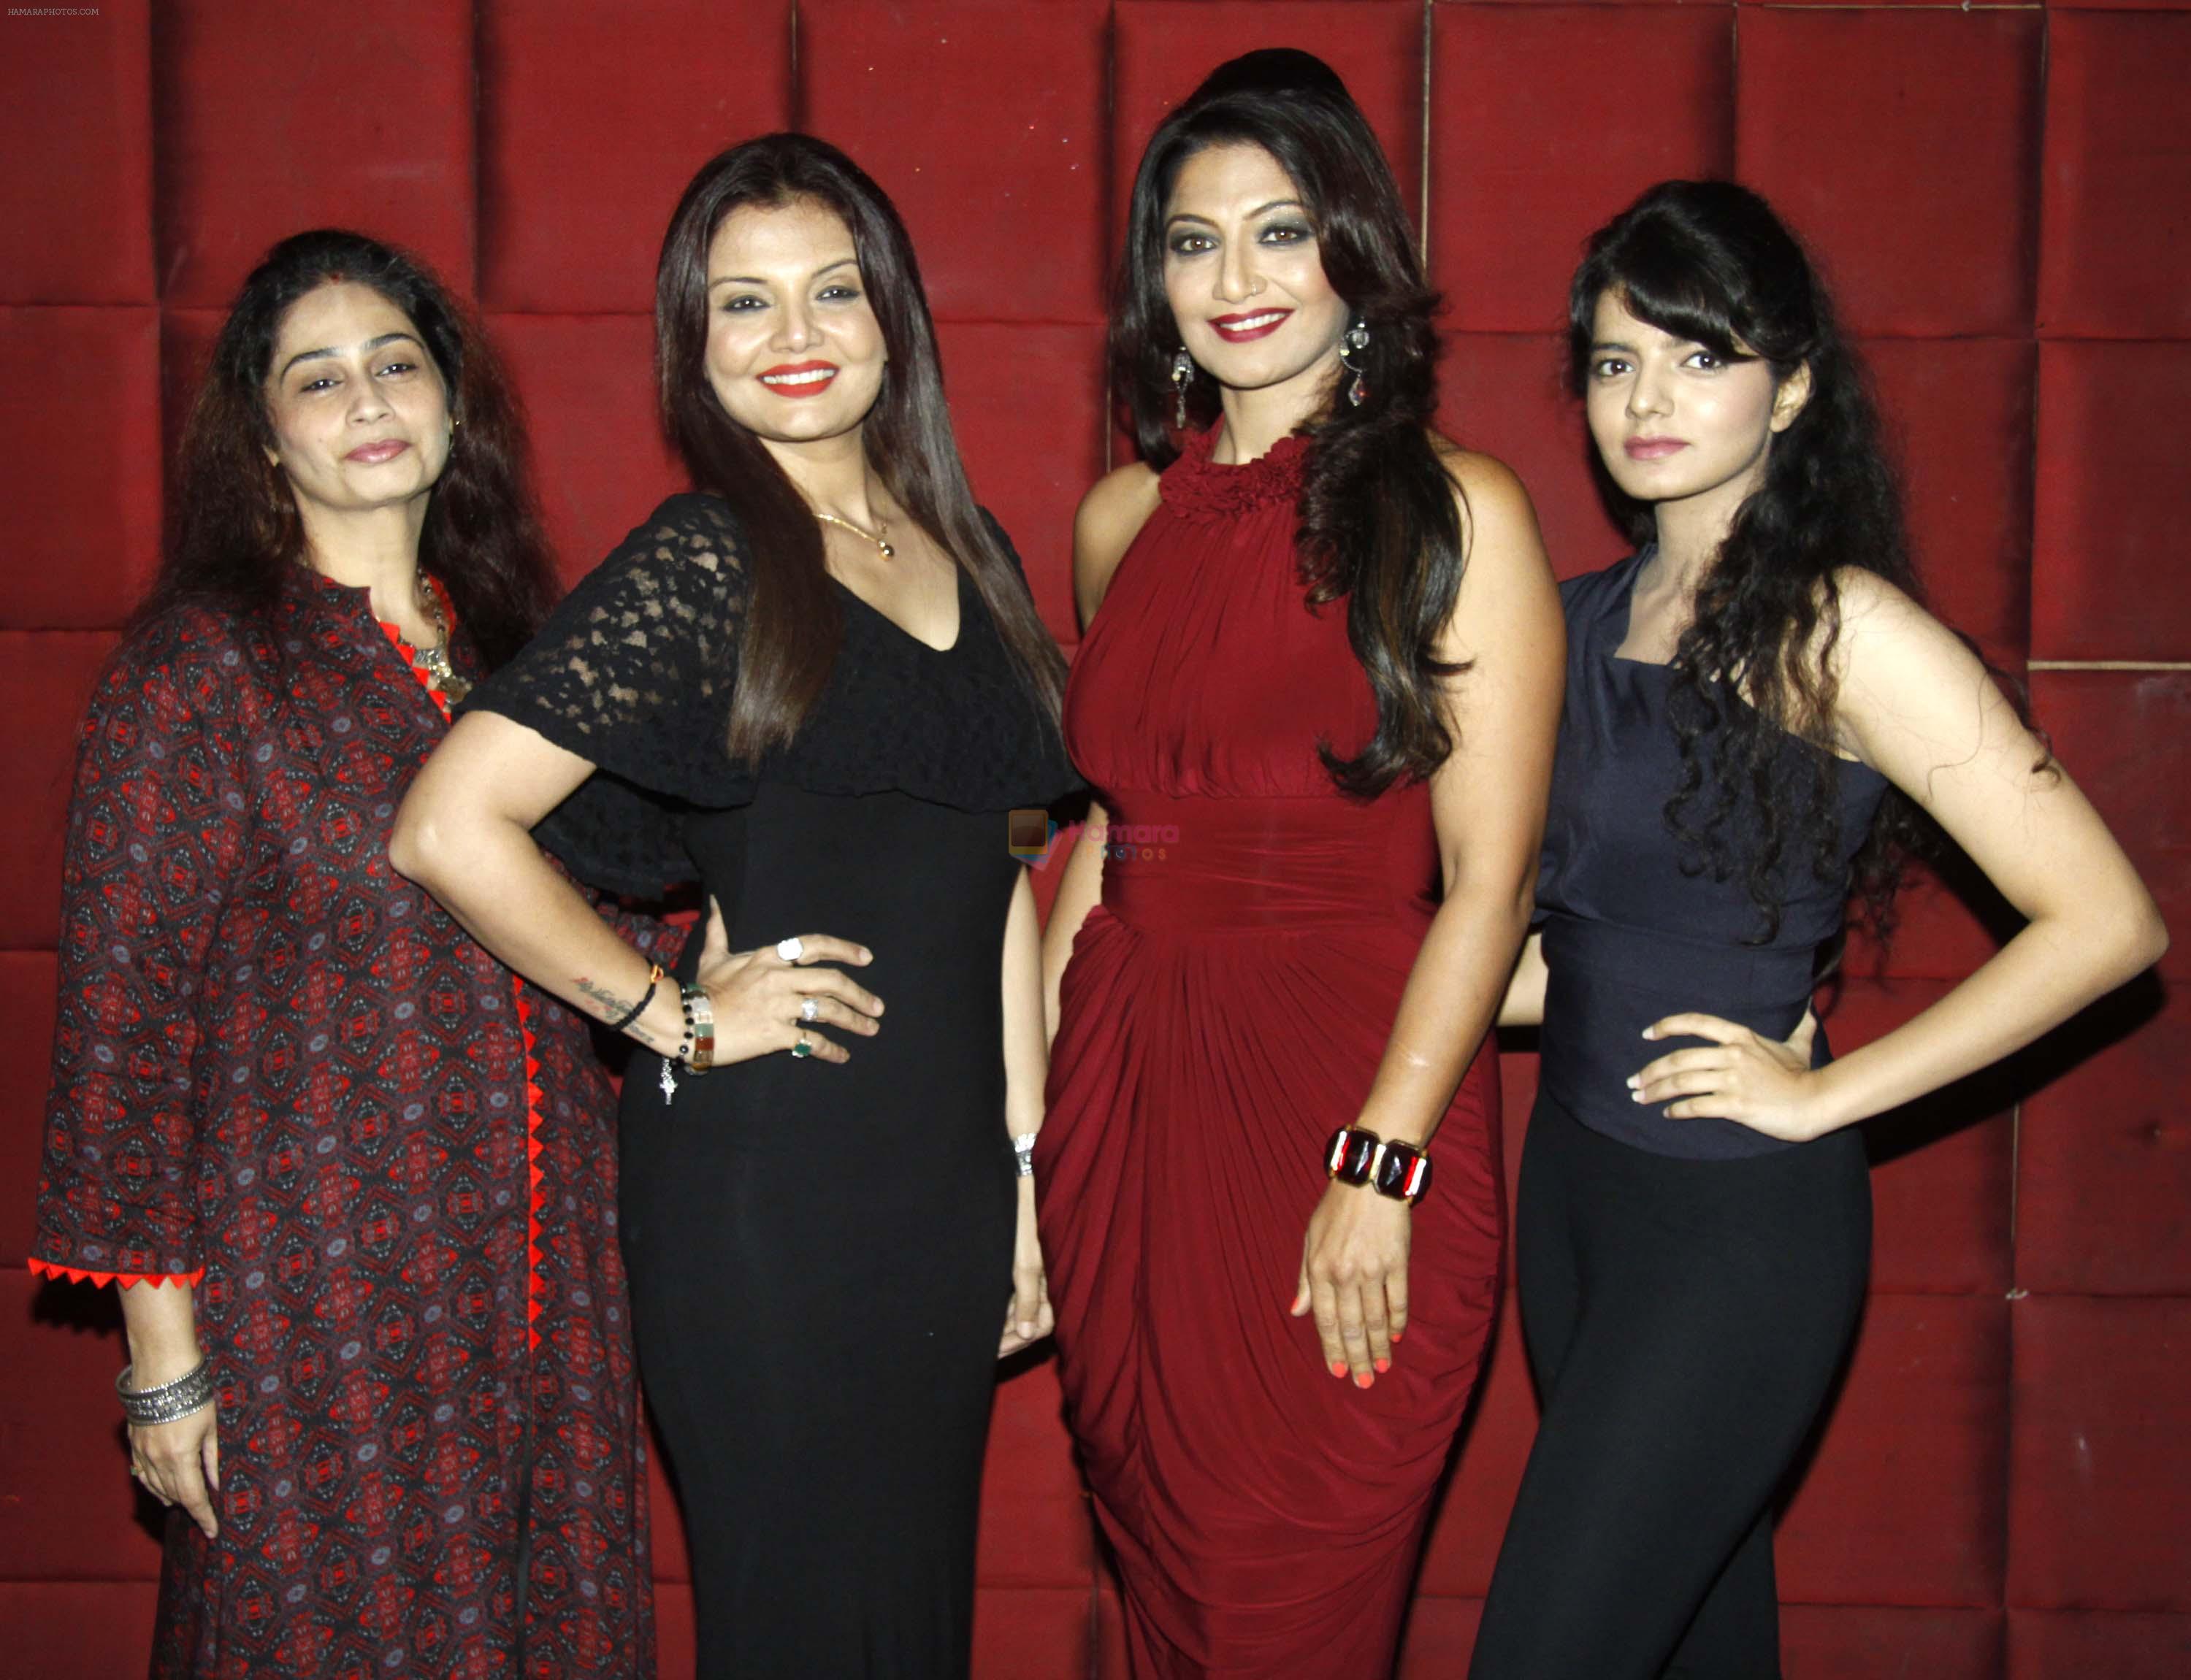 neena singh,deepshikha,aartii & priyanshi naagpal at a surprise party for Aartii Naagpal on 27th July 2016